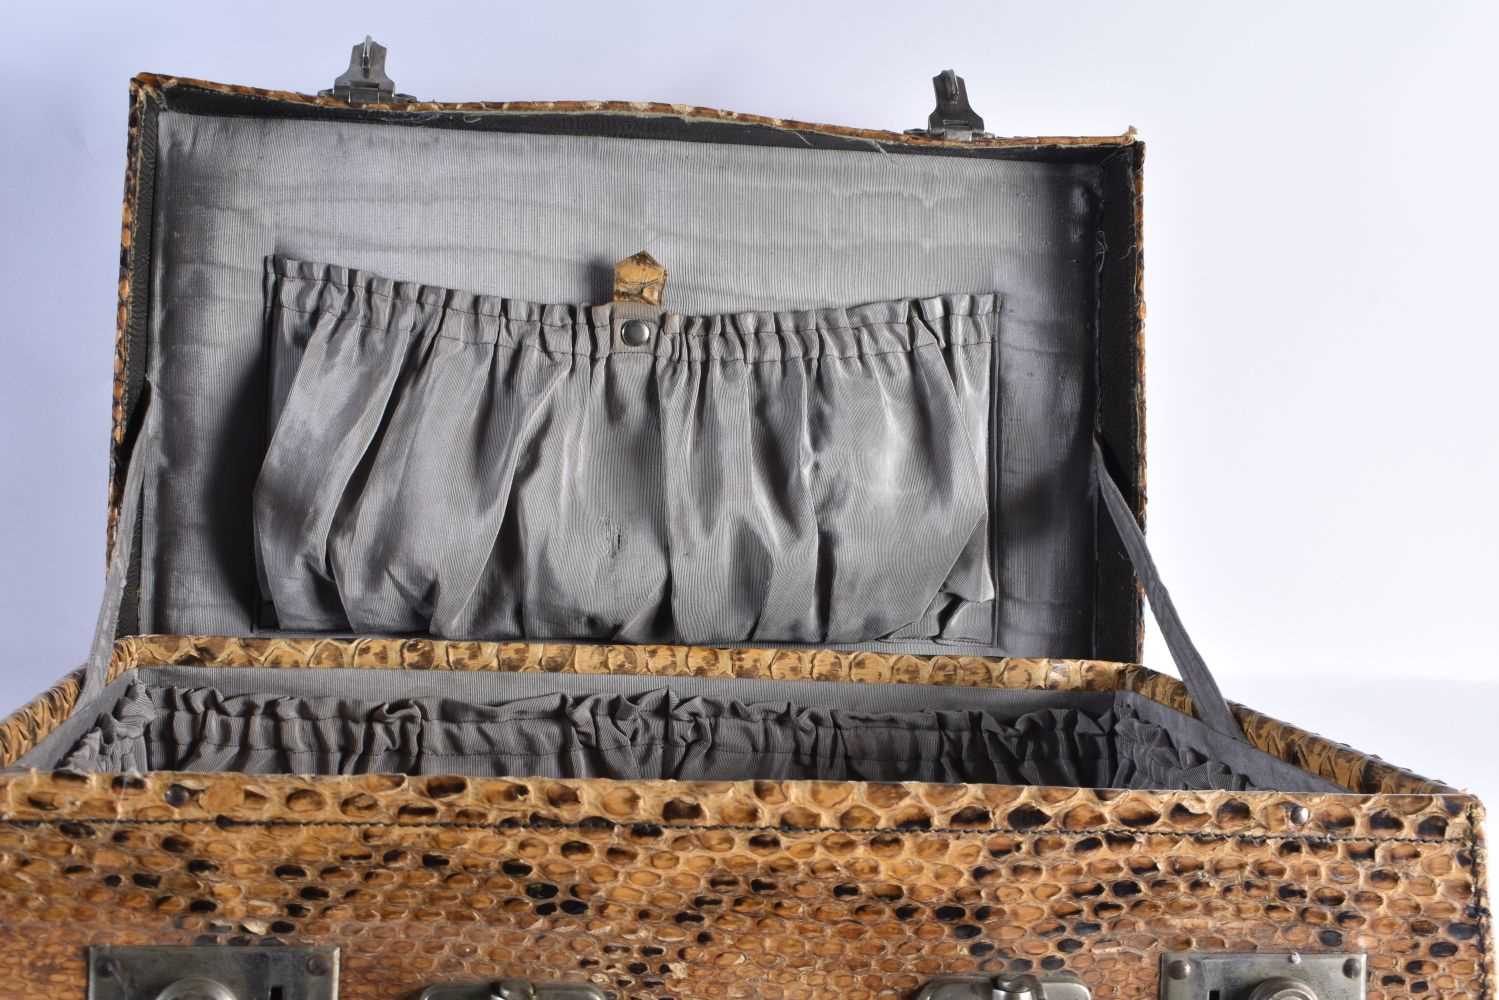 AN ANTIQUE TAXIDERMY WORKED SNAKE SKIN SUITCASE. 44 cm x 30 cm. - Image 5 of 7